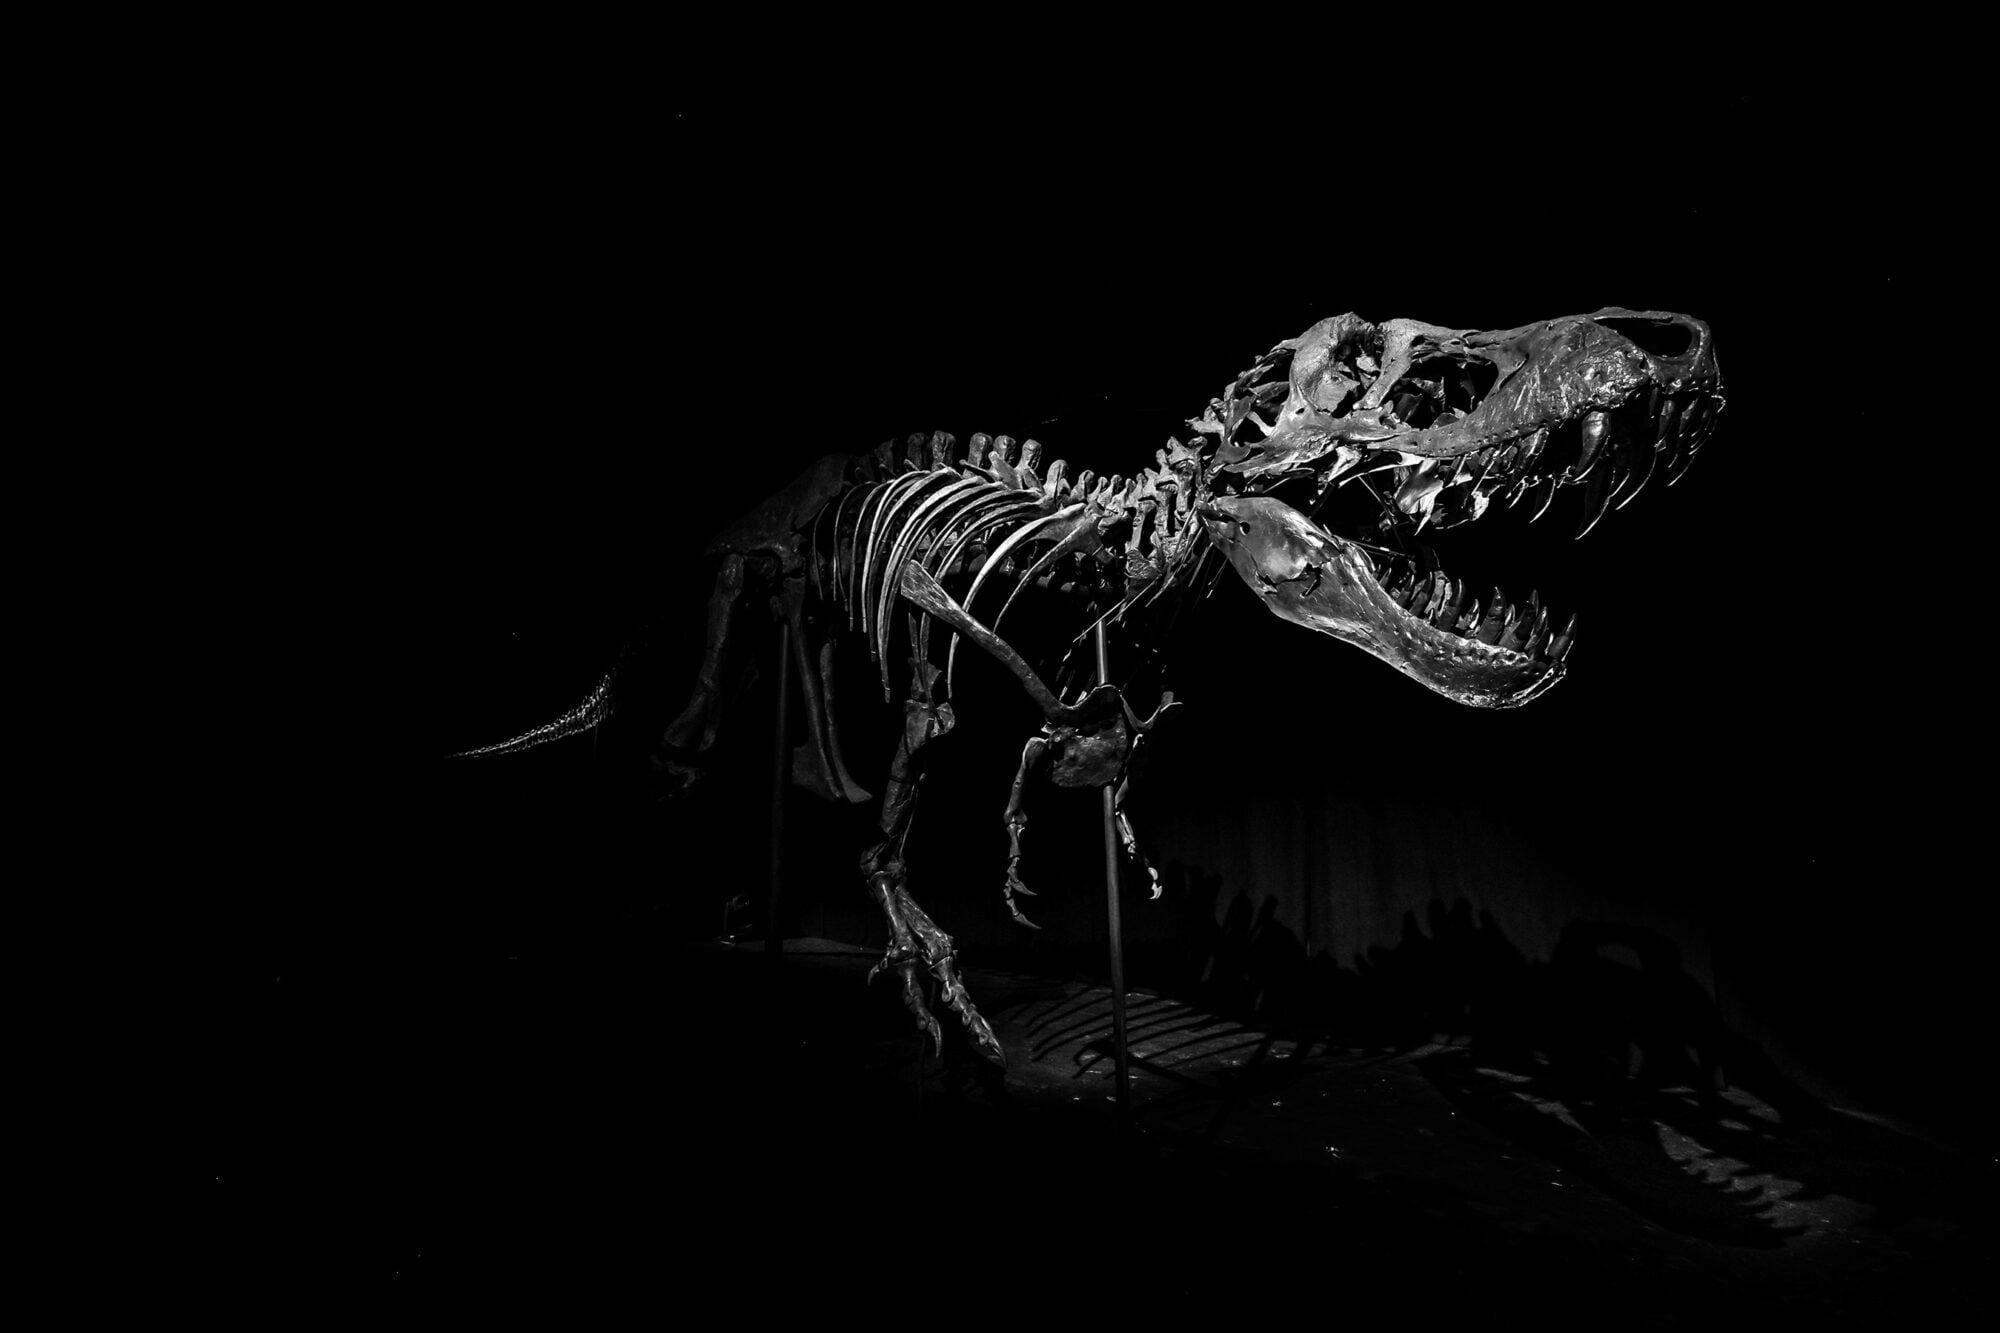 Stan the 67-million-year-old T. Rex